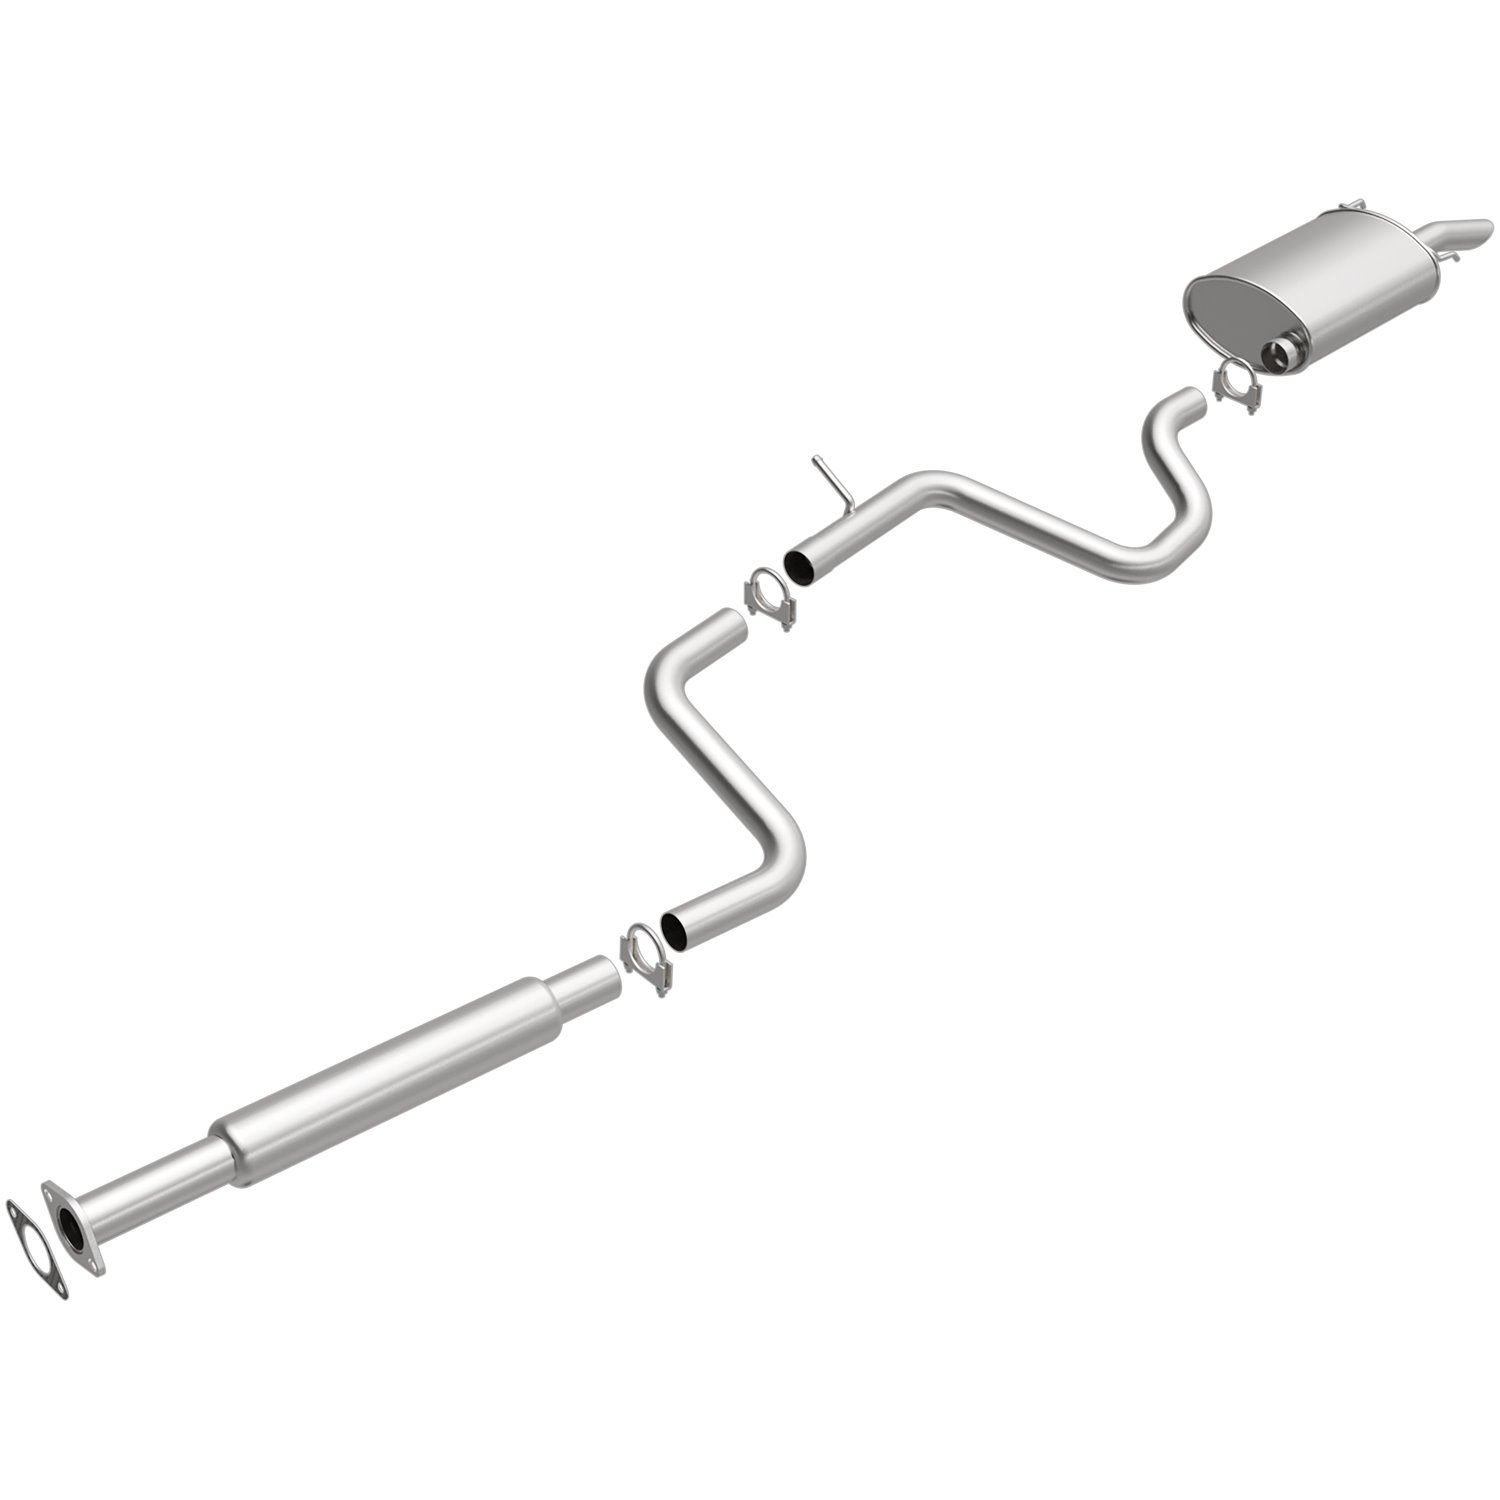 Direct-Fit Exhaust Kit, 2003-2005 Chevy Impala 3.4L